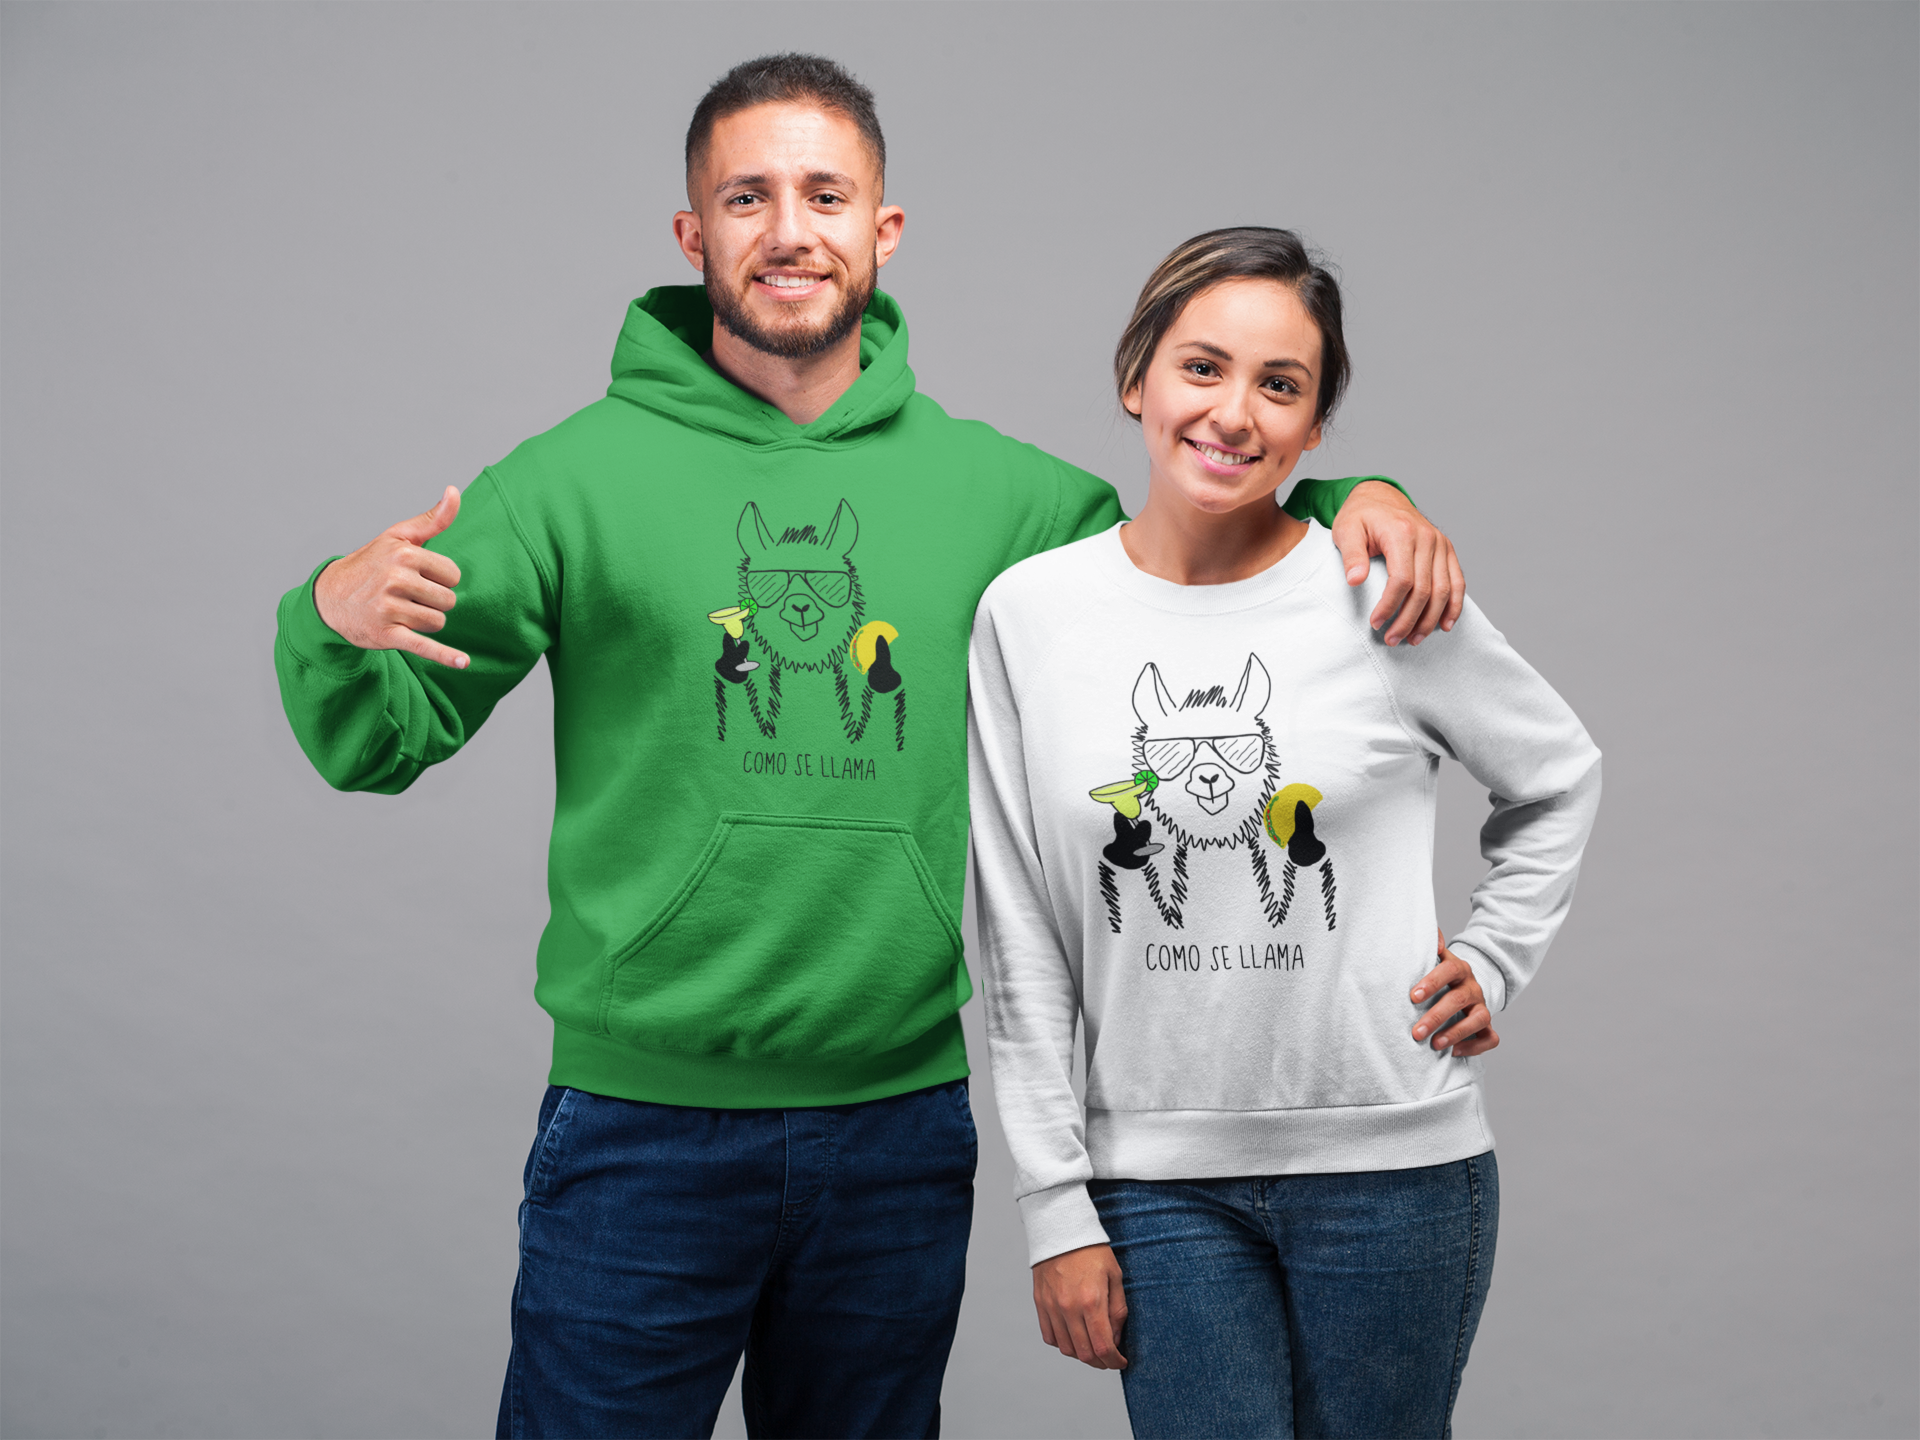 Coming Se Llama?! This funny hoodie sweatshirt put a fun and festive twist on the original Spanish saying. Show off your sense of humor and love for llamas with this funny hoodie. This llama rocking his taco, margarita, and cool sunglasses are the perfect gift for your Cinco de Mayo holiday, or just to wear around town! 